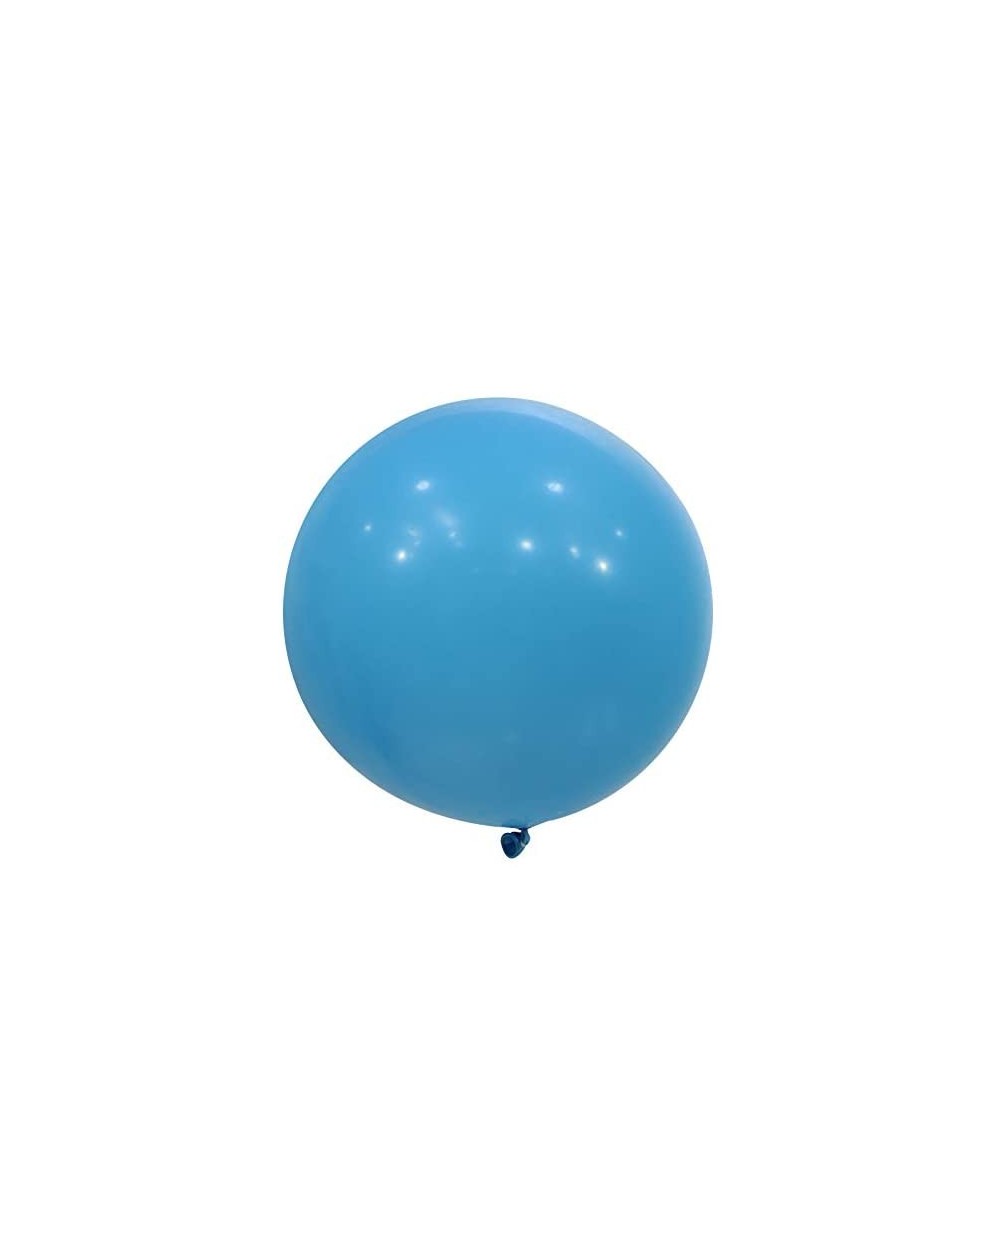 Balloons 36 Inch Big Round Balloons 10 Pack Light Blue Thick Giant Balloons for Photo Shoot Wedding Baby Shower Birthday Part...